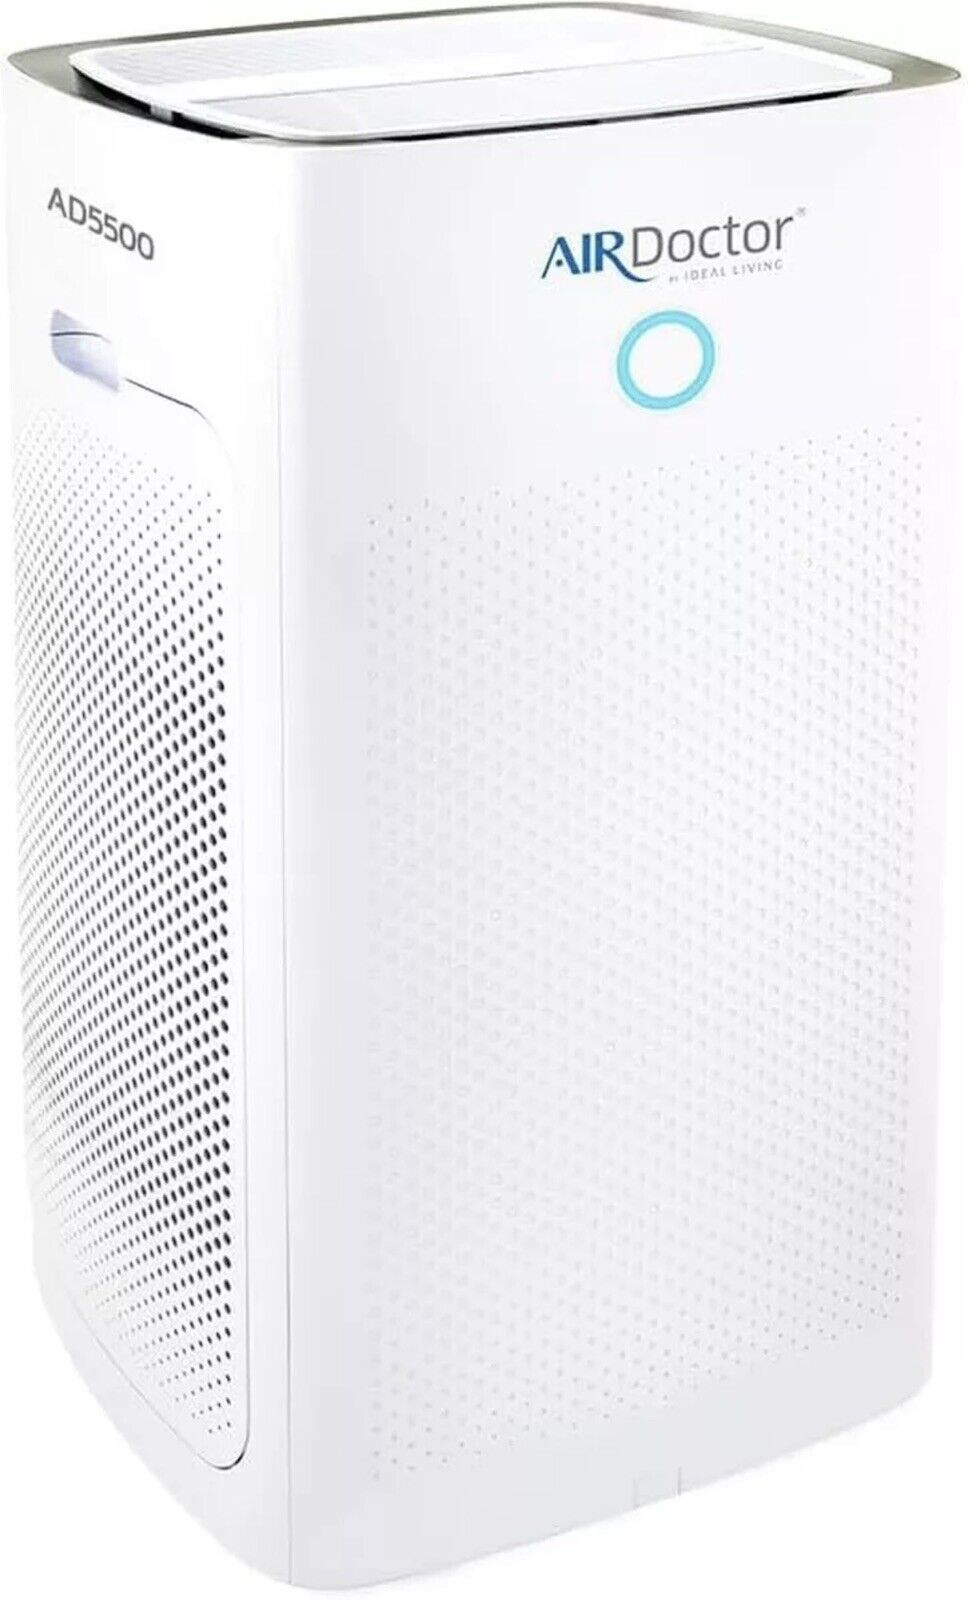 NEW AirDoctor AD5500 4-in-1 Air Purifier 